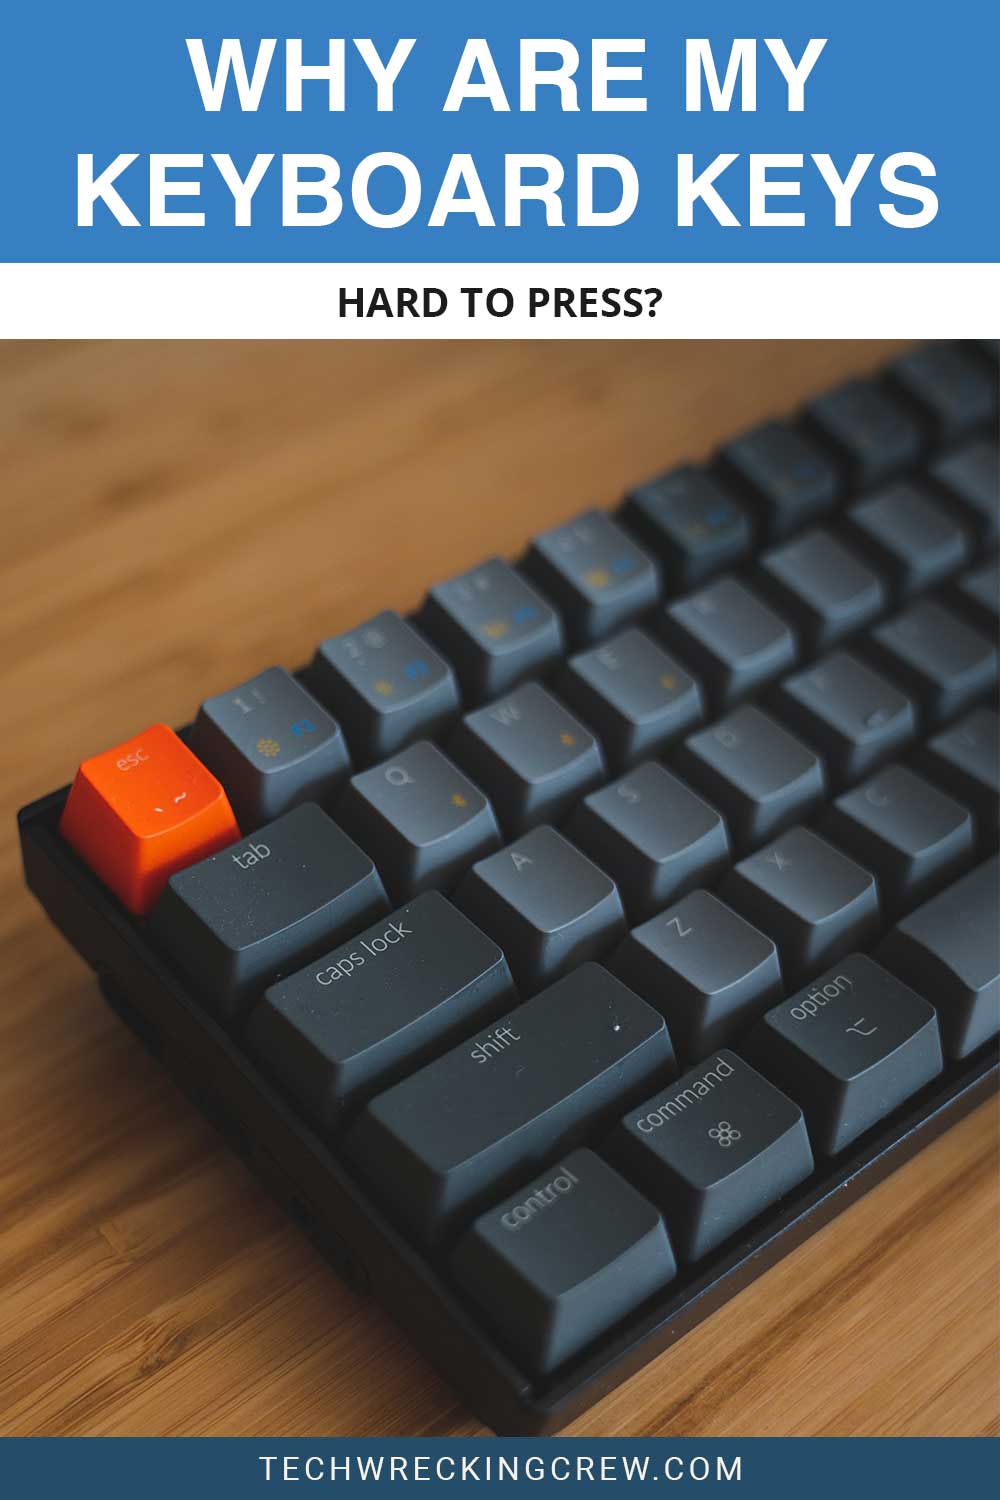 A black keyboard on a wooden surface - Why Are My Keyboard Keys Hard to Press